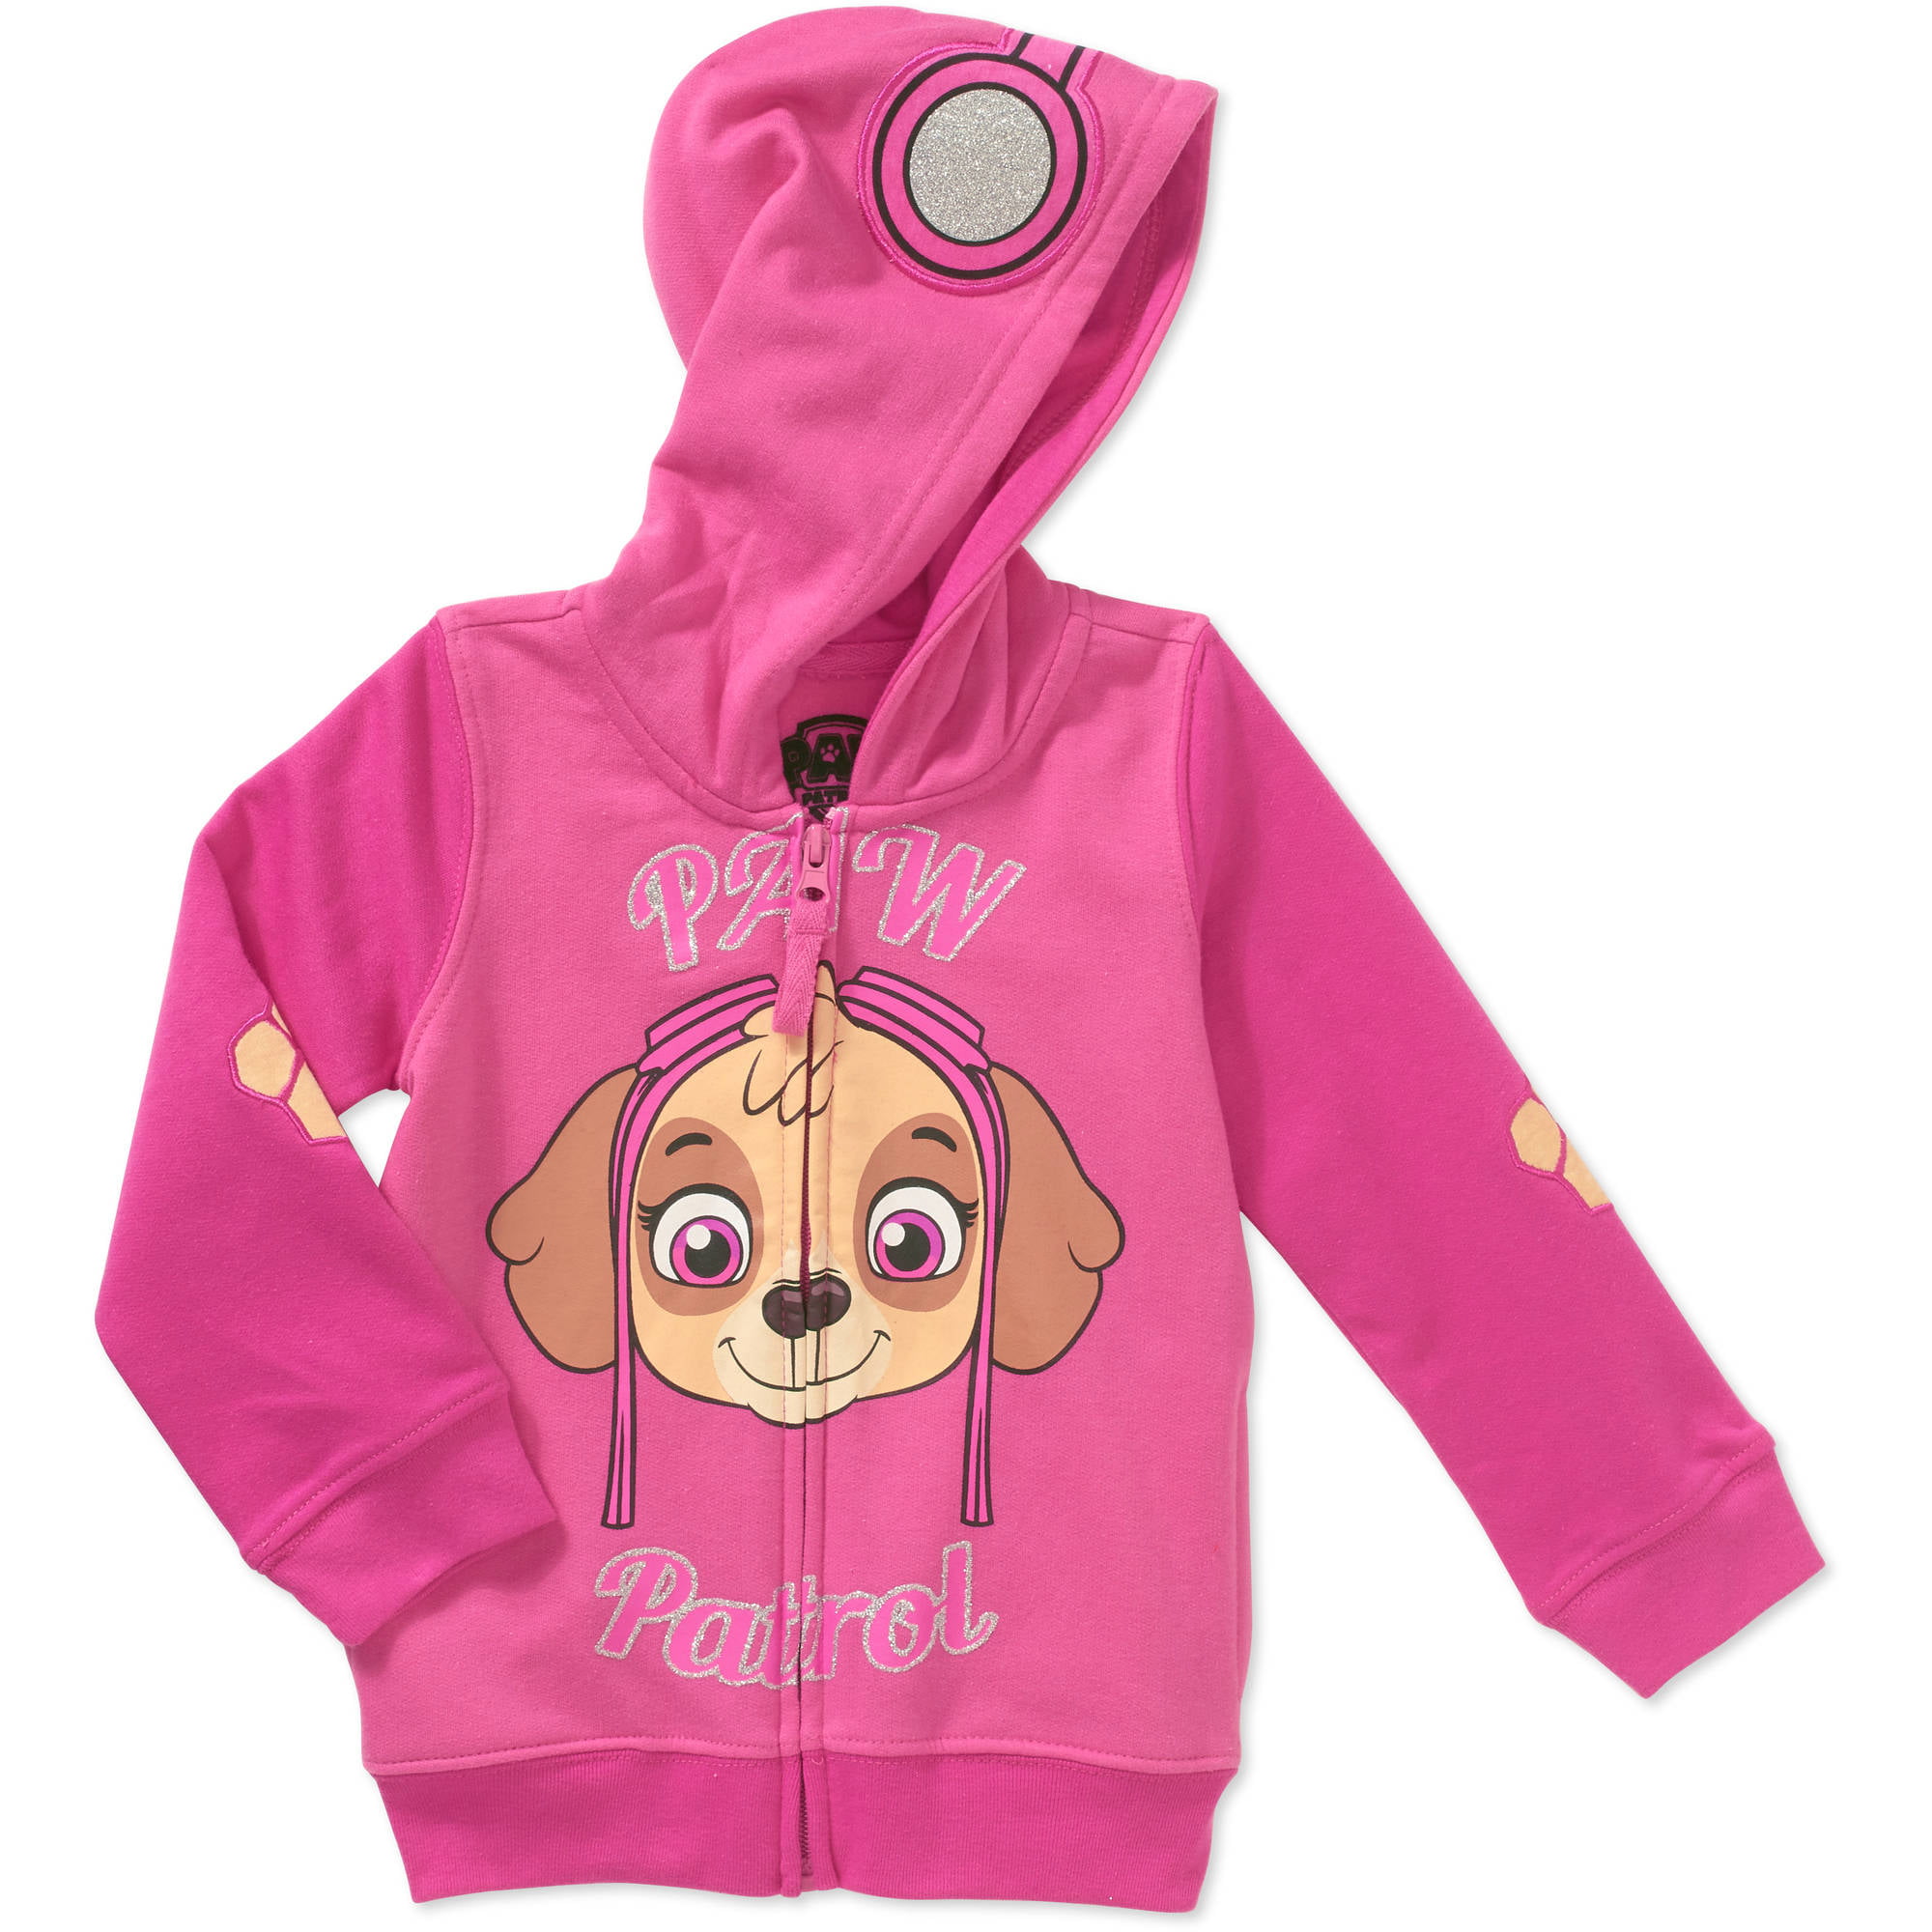 Youth Hooded Sweatshirt With Cute Four Paw Design/ Puppy Lover Kids Hoodie/ Child's Hoodie/ Cat Lover Hoodie/ Cute Kids Paw Design Hoodie